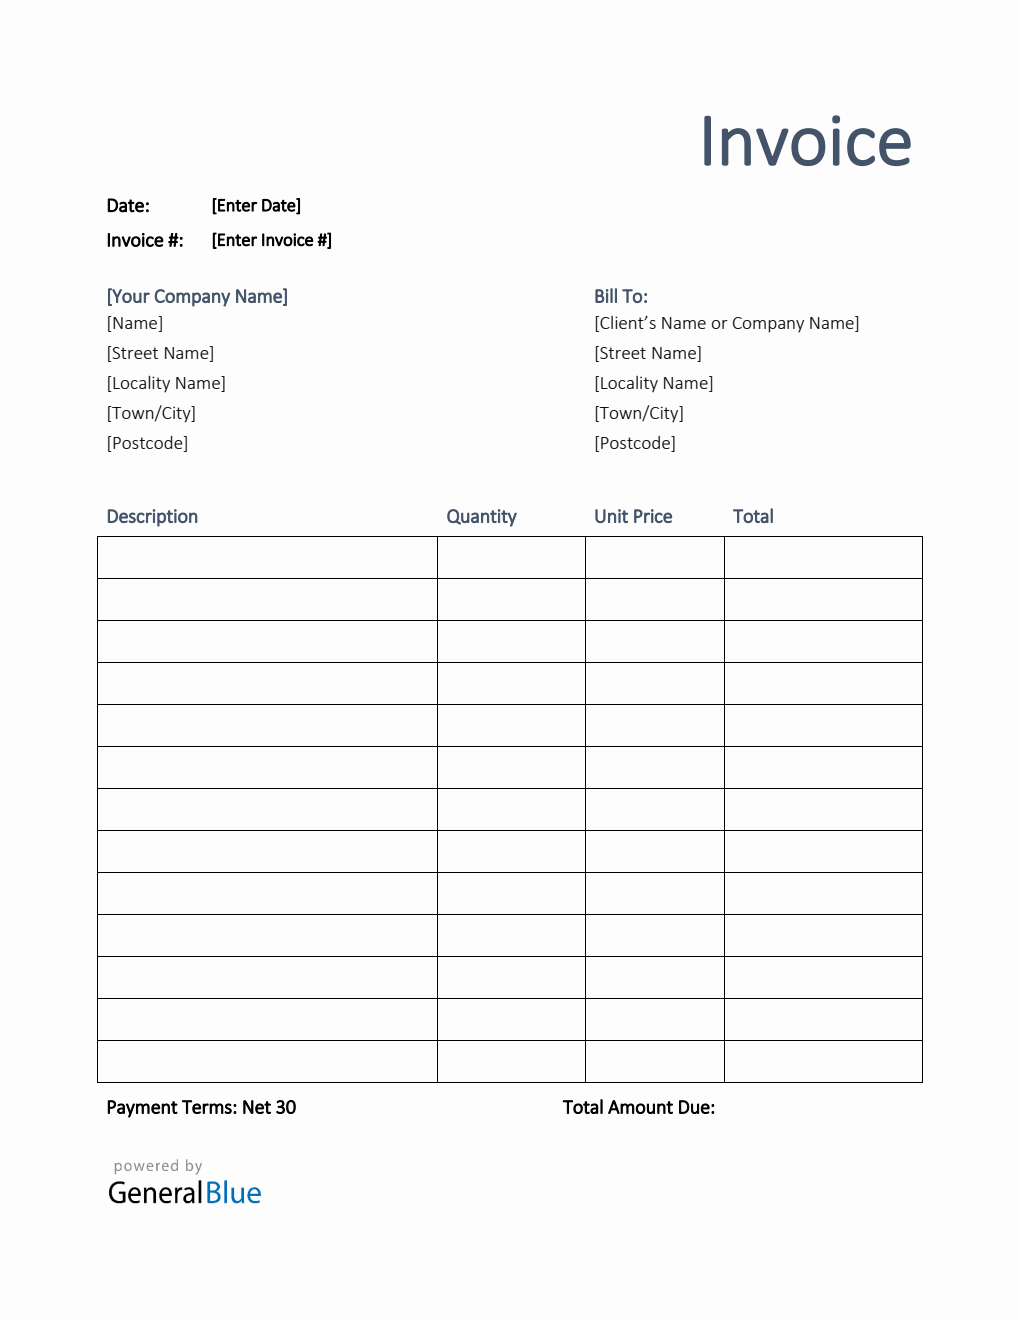 Invoice Template for U.K. in Word (Printable)